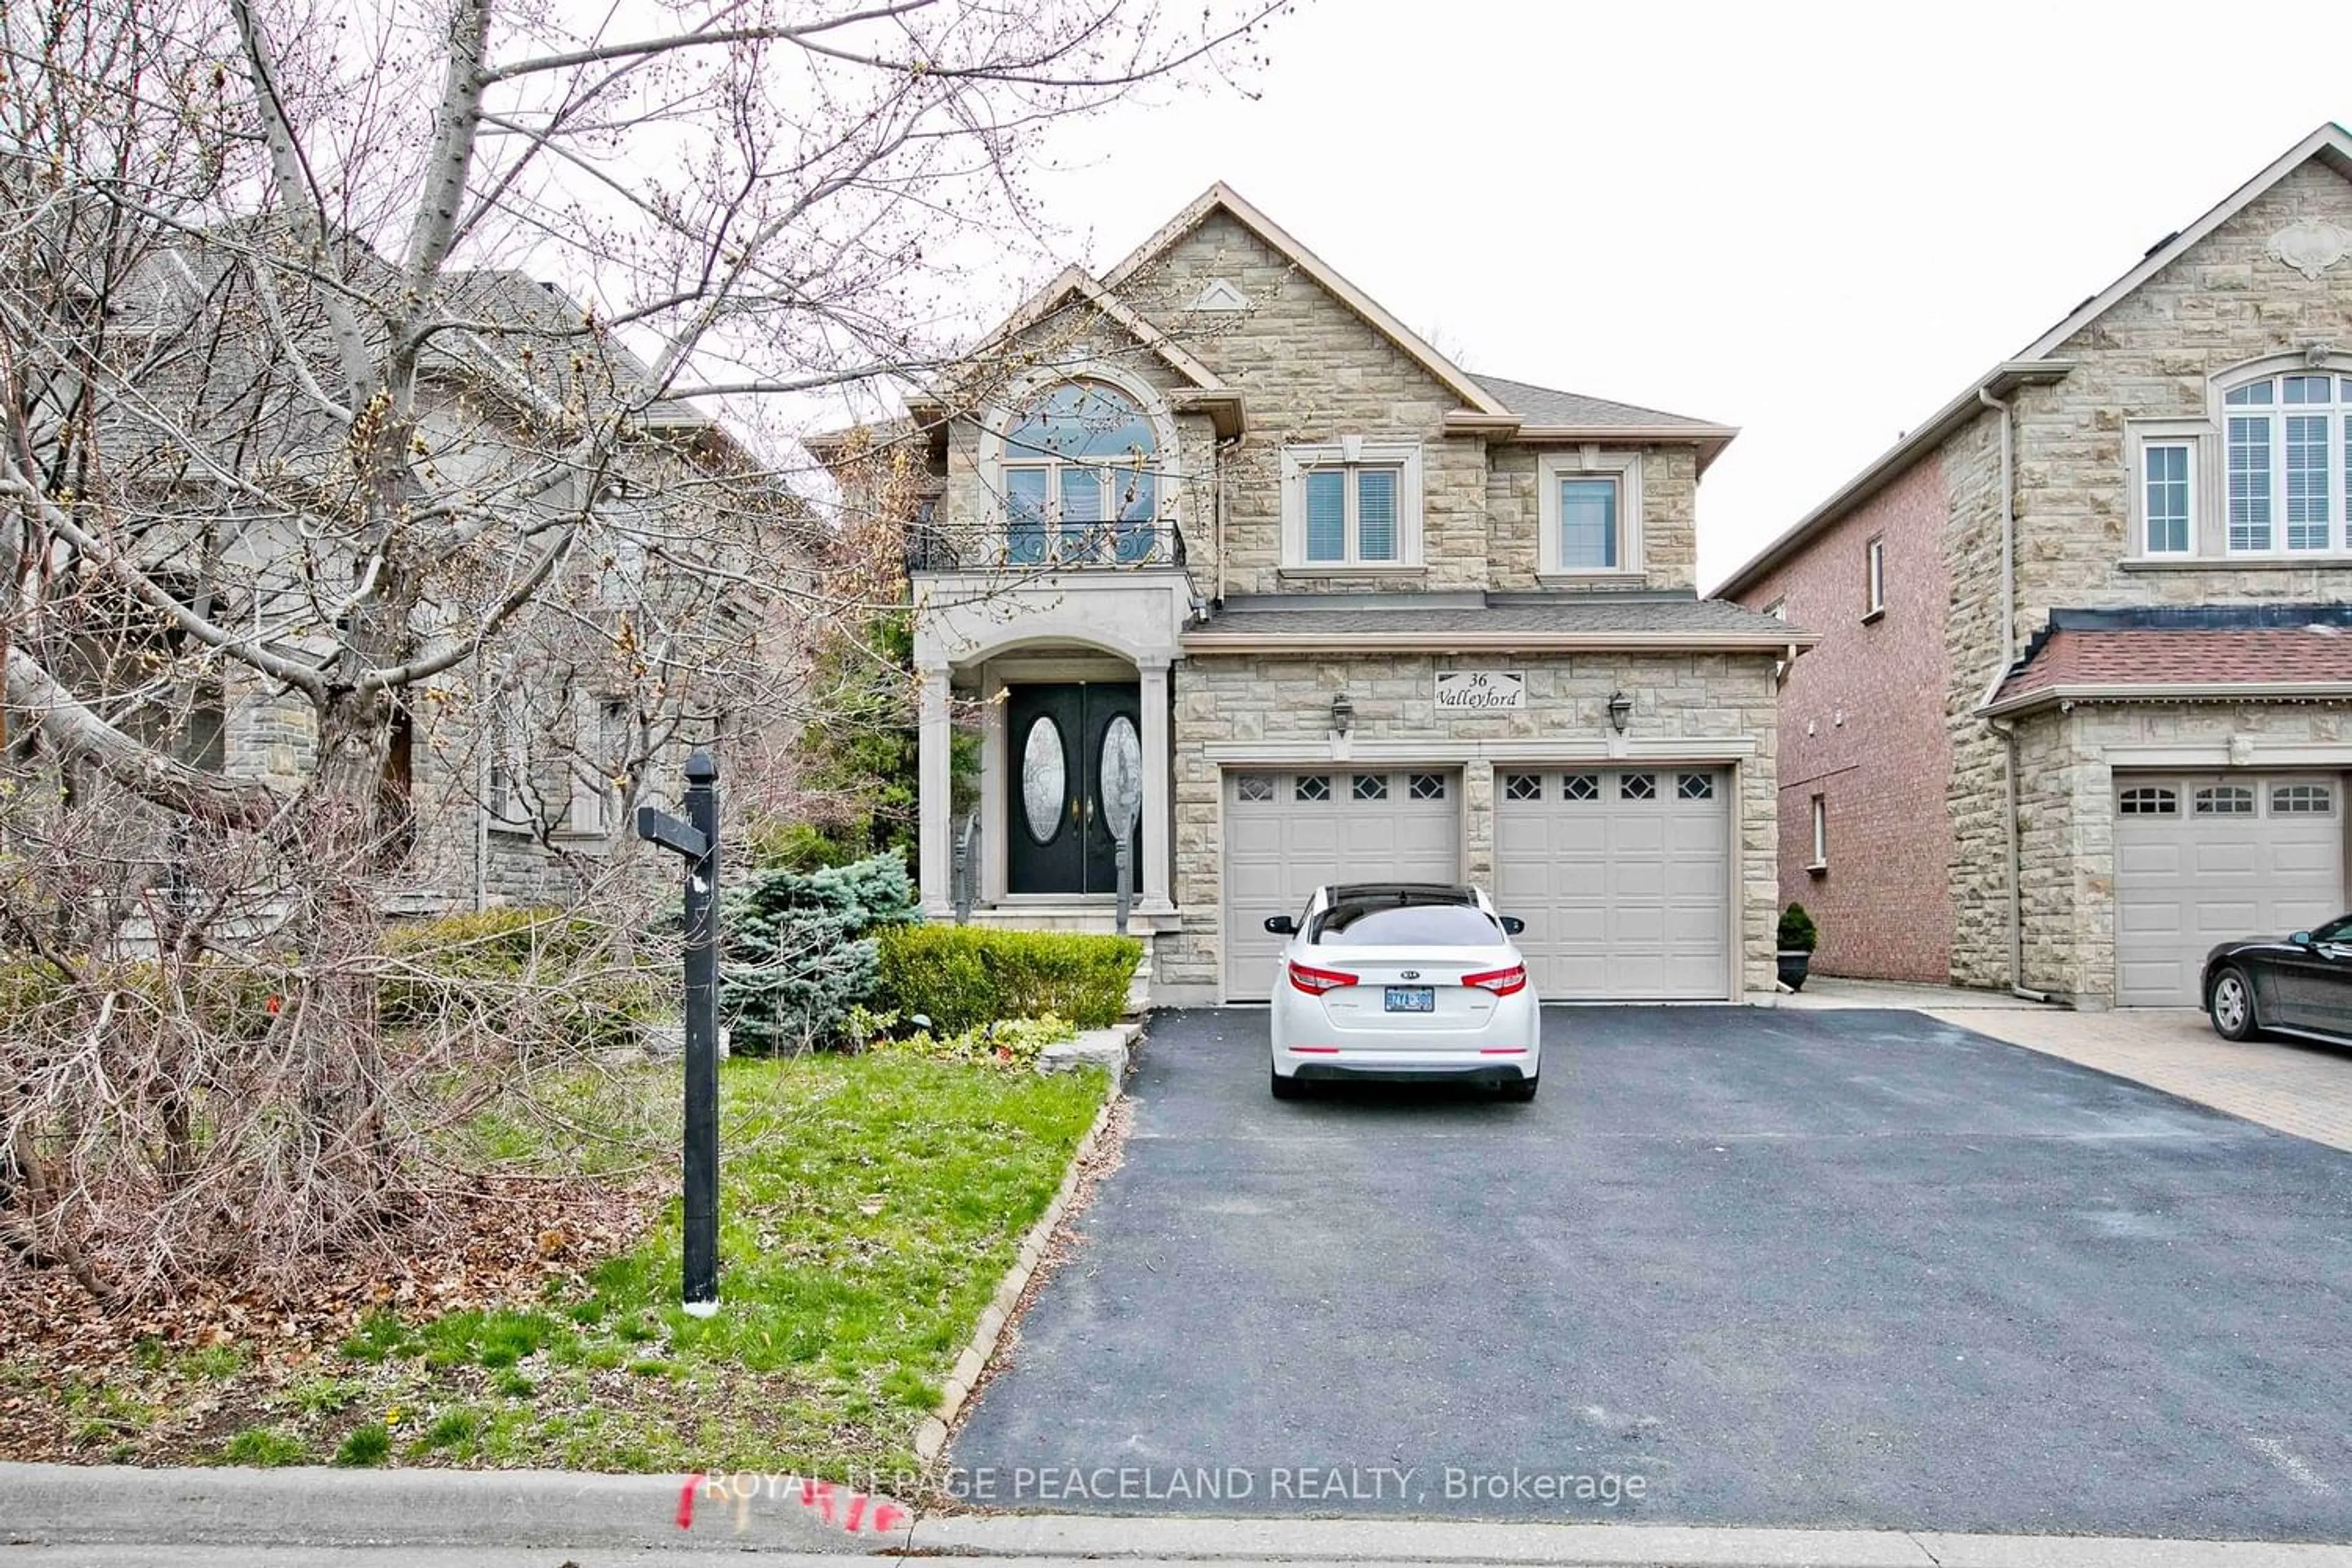 Home with brick exterior material for 36 Valleyford Ave, Richmond Hill Ontario L4C 0A7